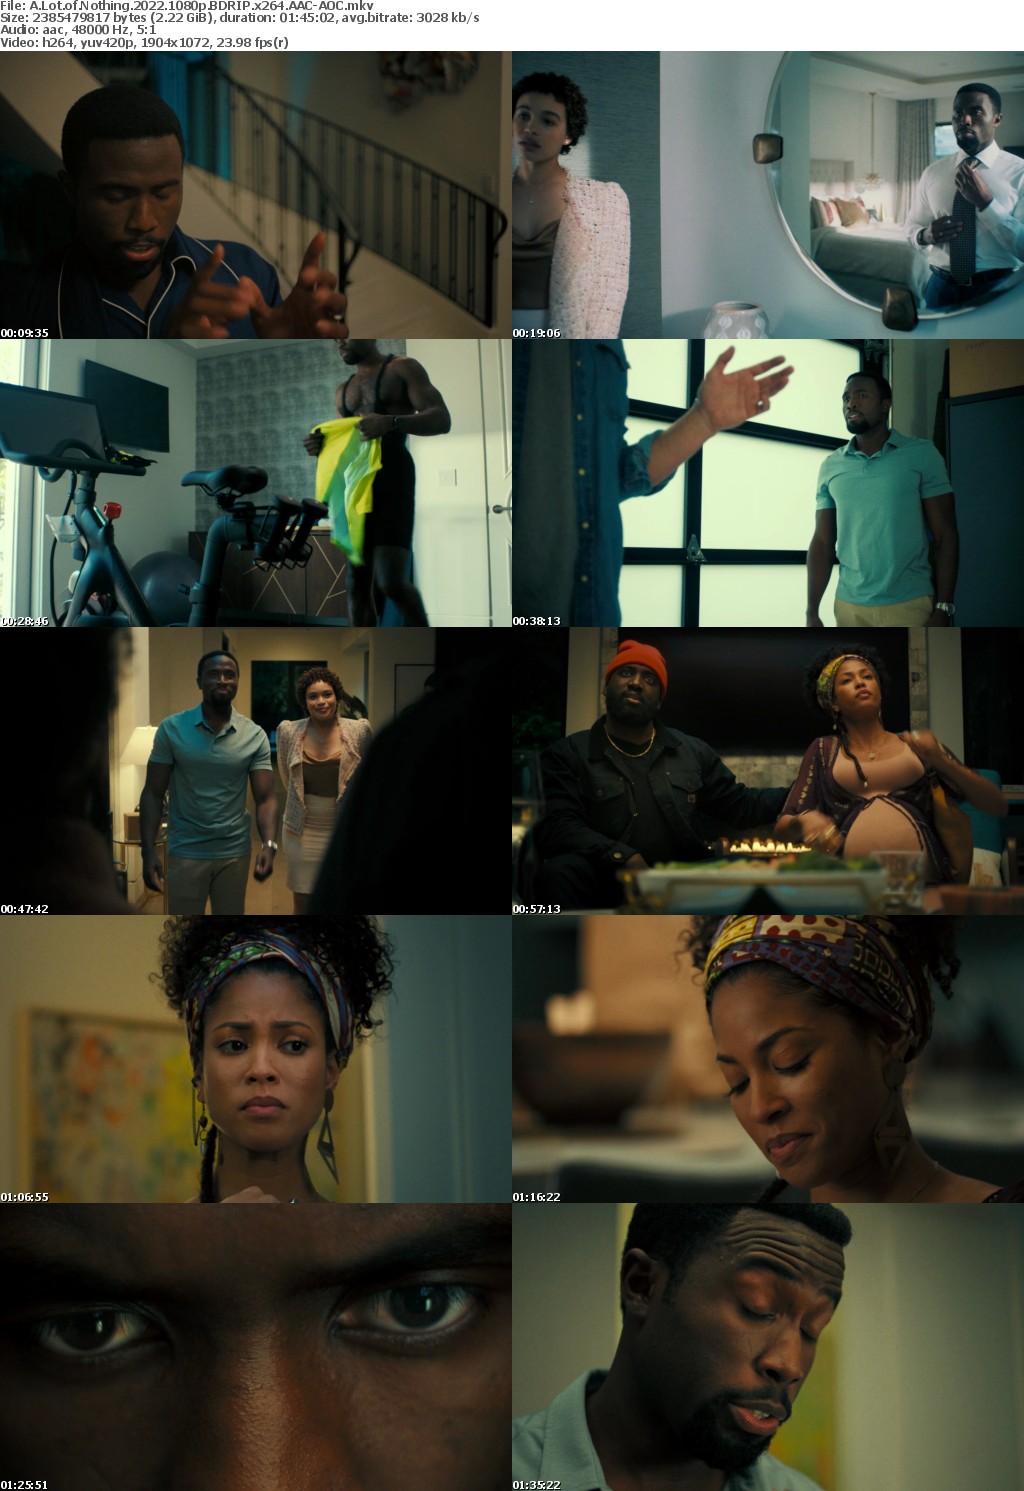 A Lot of Nothing 2022 1080p BDRIP x264 AAC-AOC